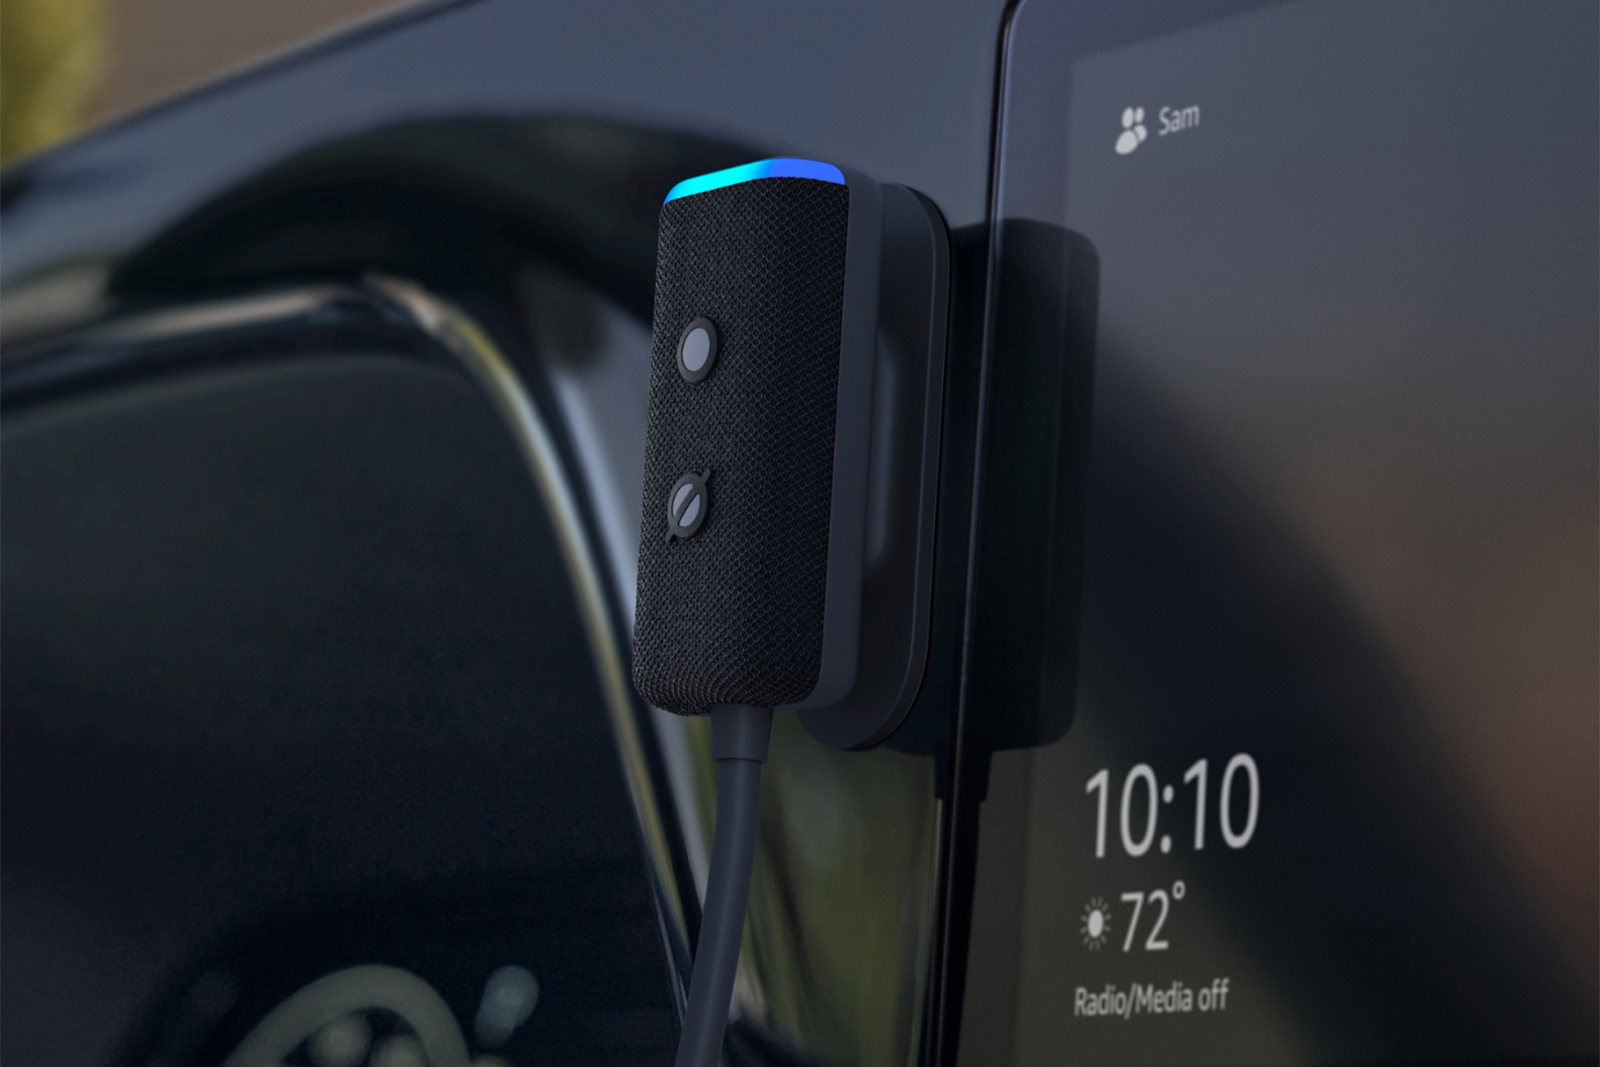 Amazon's latest Echo Auto is a car must-have at nearly 30% off